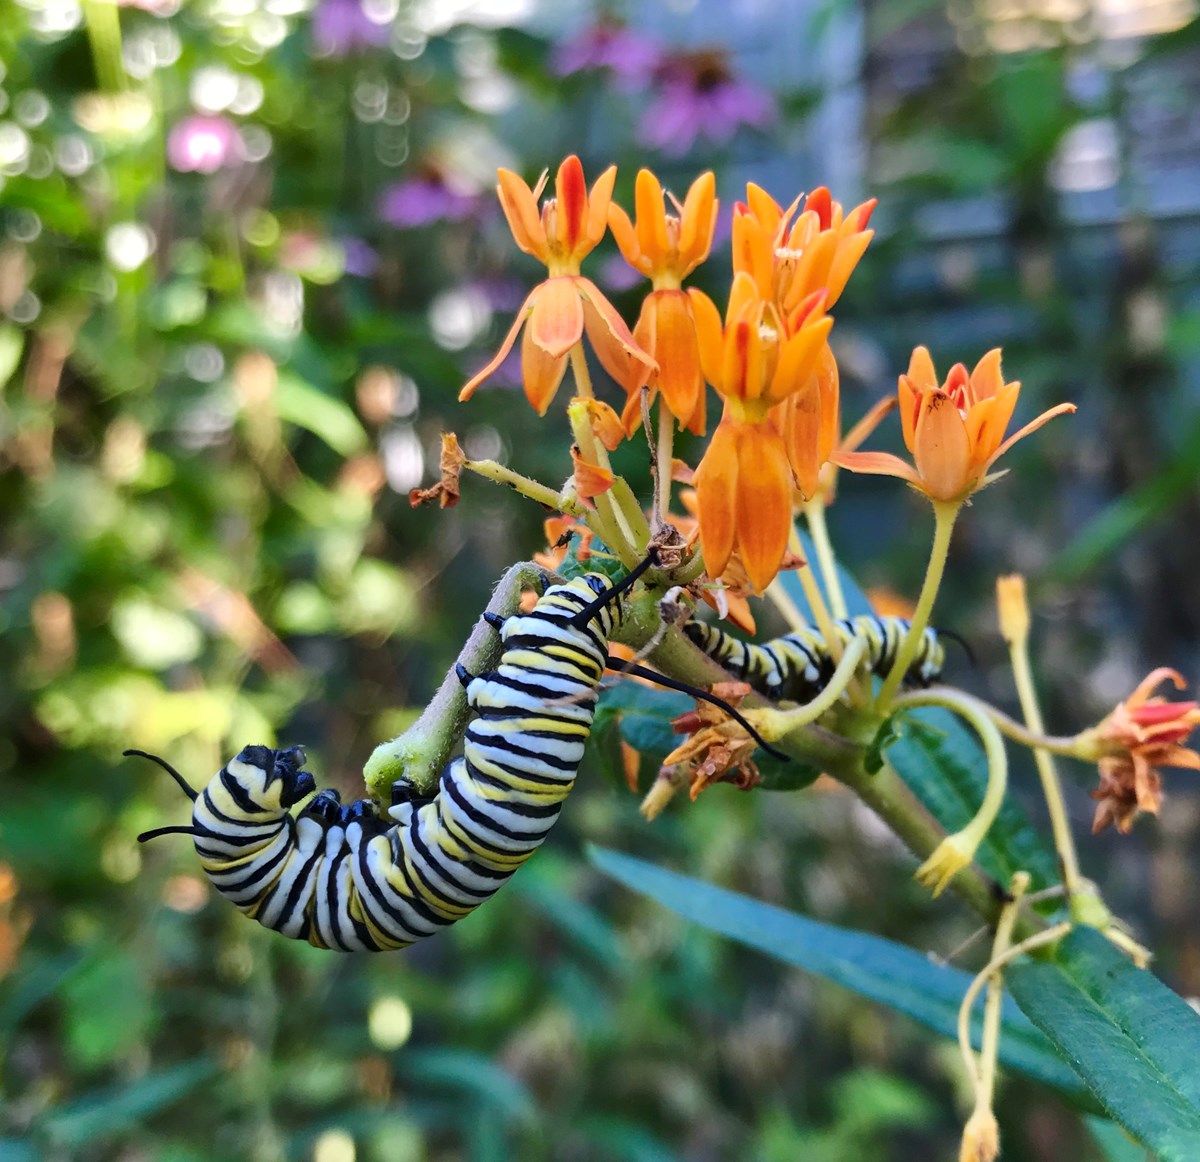 A close up of a black, yellow, and white striped caterpillar on orange flowers.